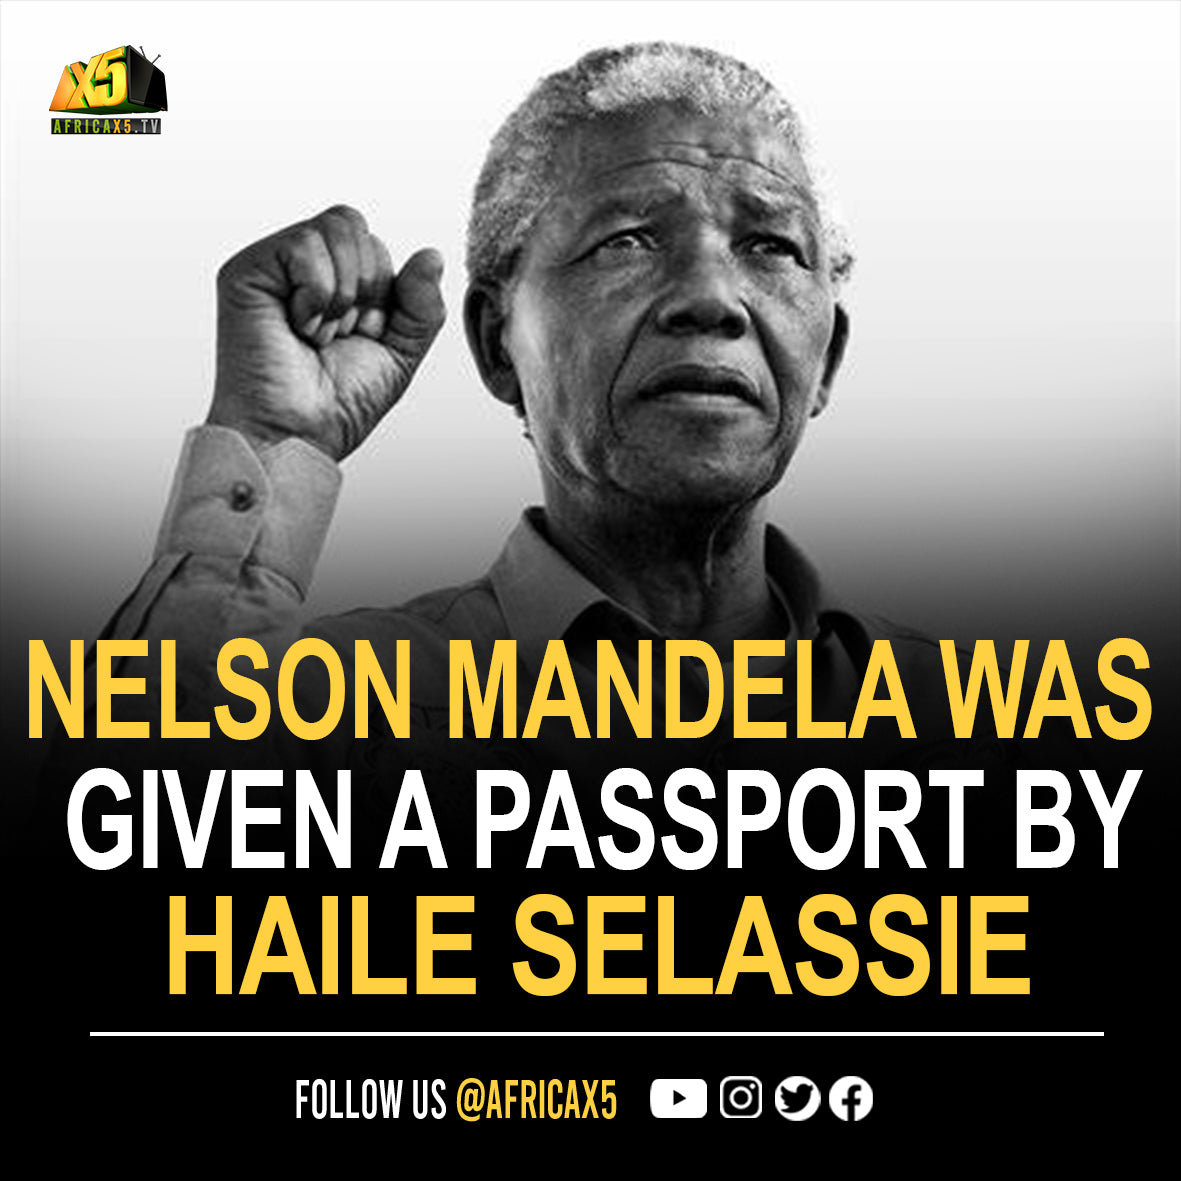 Nelson Mandela’s Ethiopian passport under the name David Motsamayi given to him by Emperor Haile Selassie in 1962 to allow him to travel undetected.